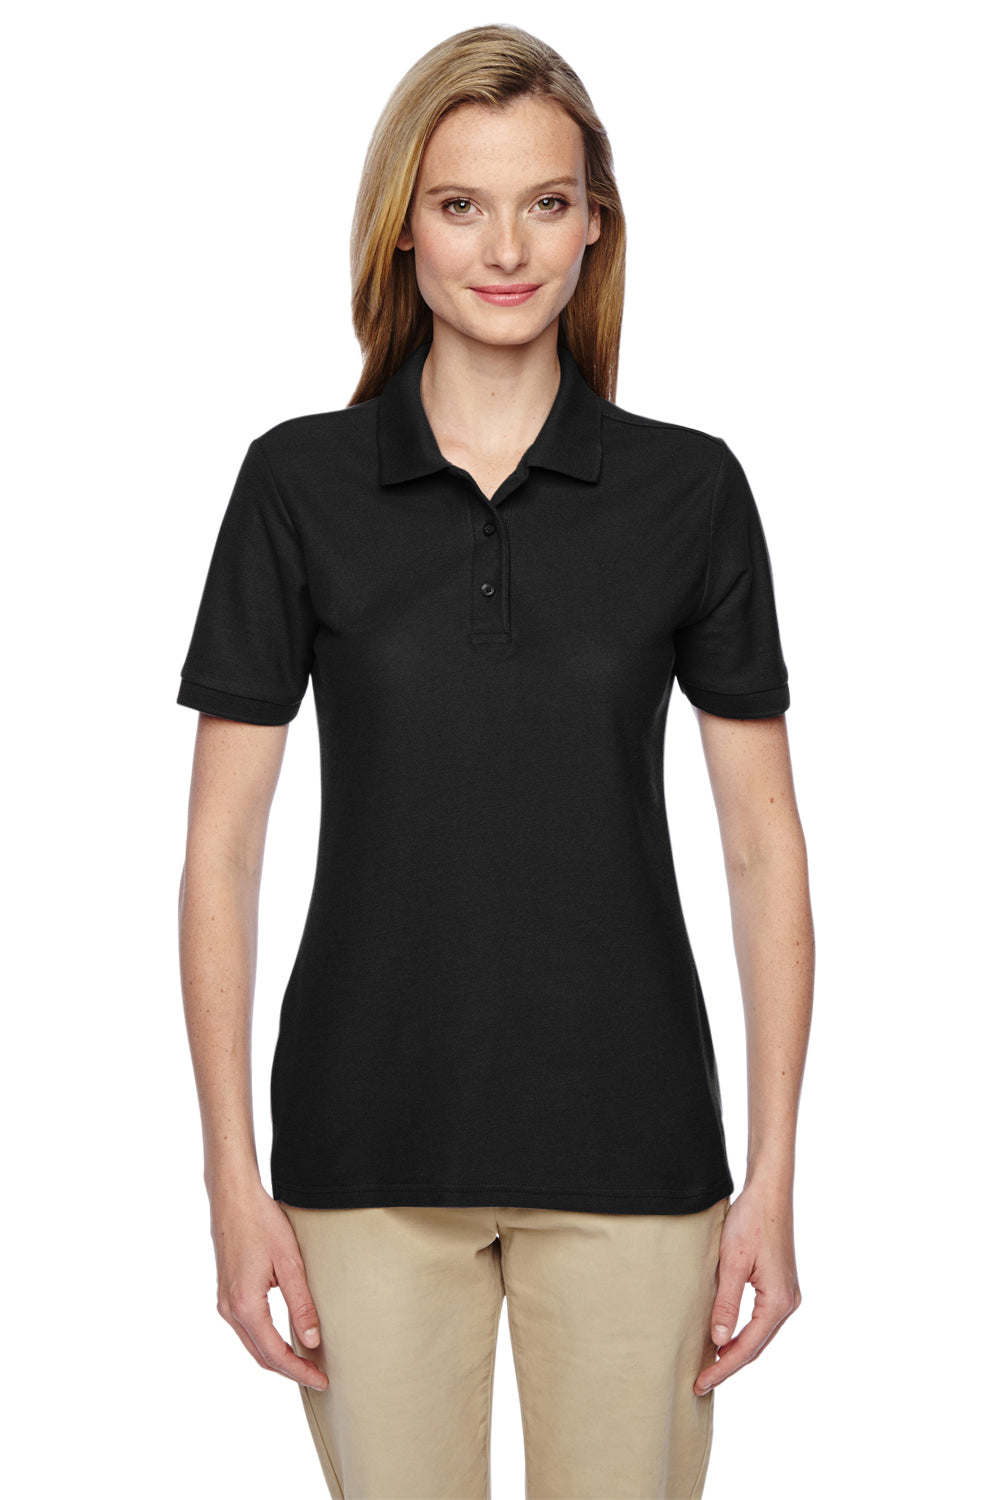 Jerzees 537WR Womens Easy Care Moisture Wicking Short Sleeve Polo Shirt Black Front